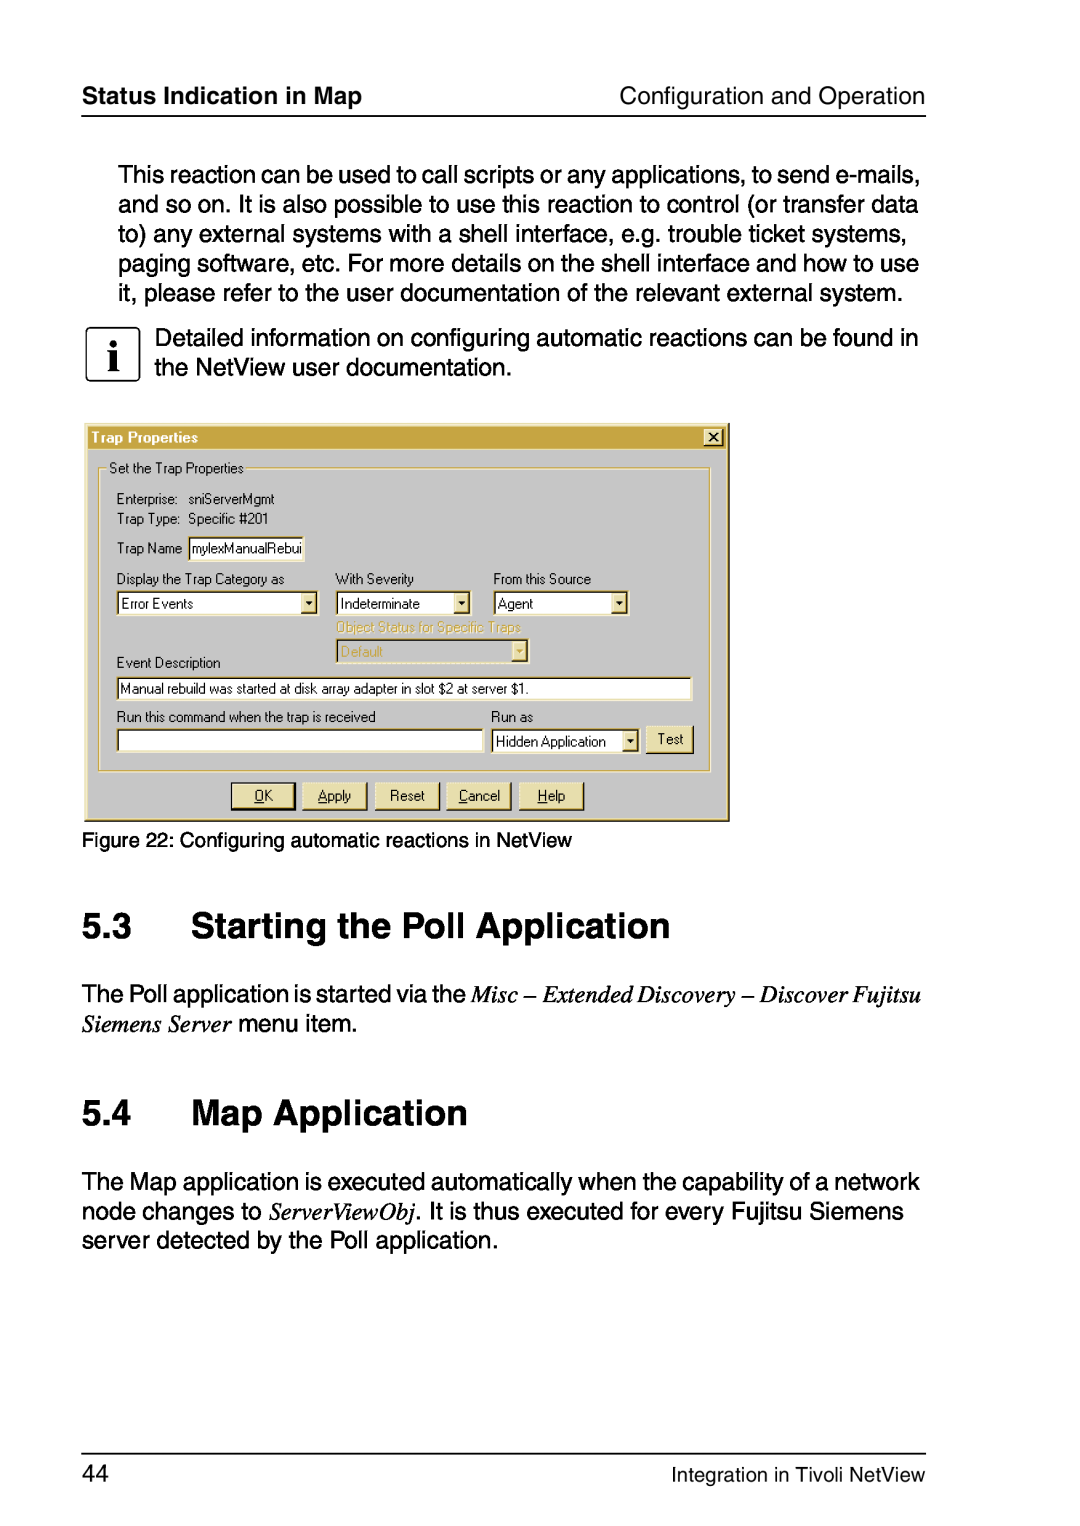 3D Connexion TivoII manual 5.3Starting the Poll Application, 5.4Map Application, Status Indication in Map 